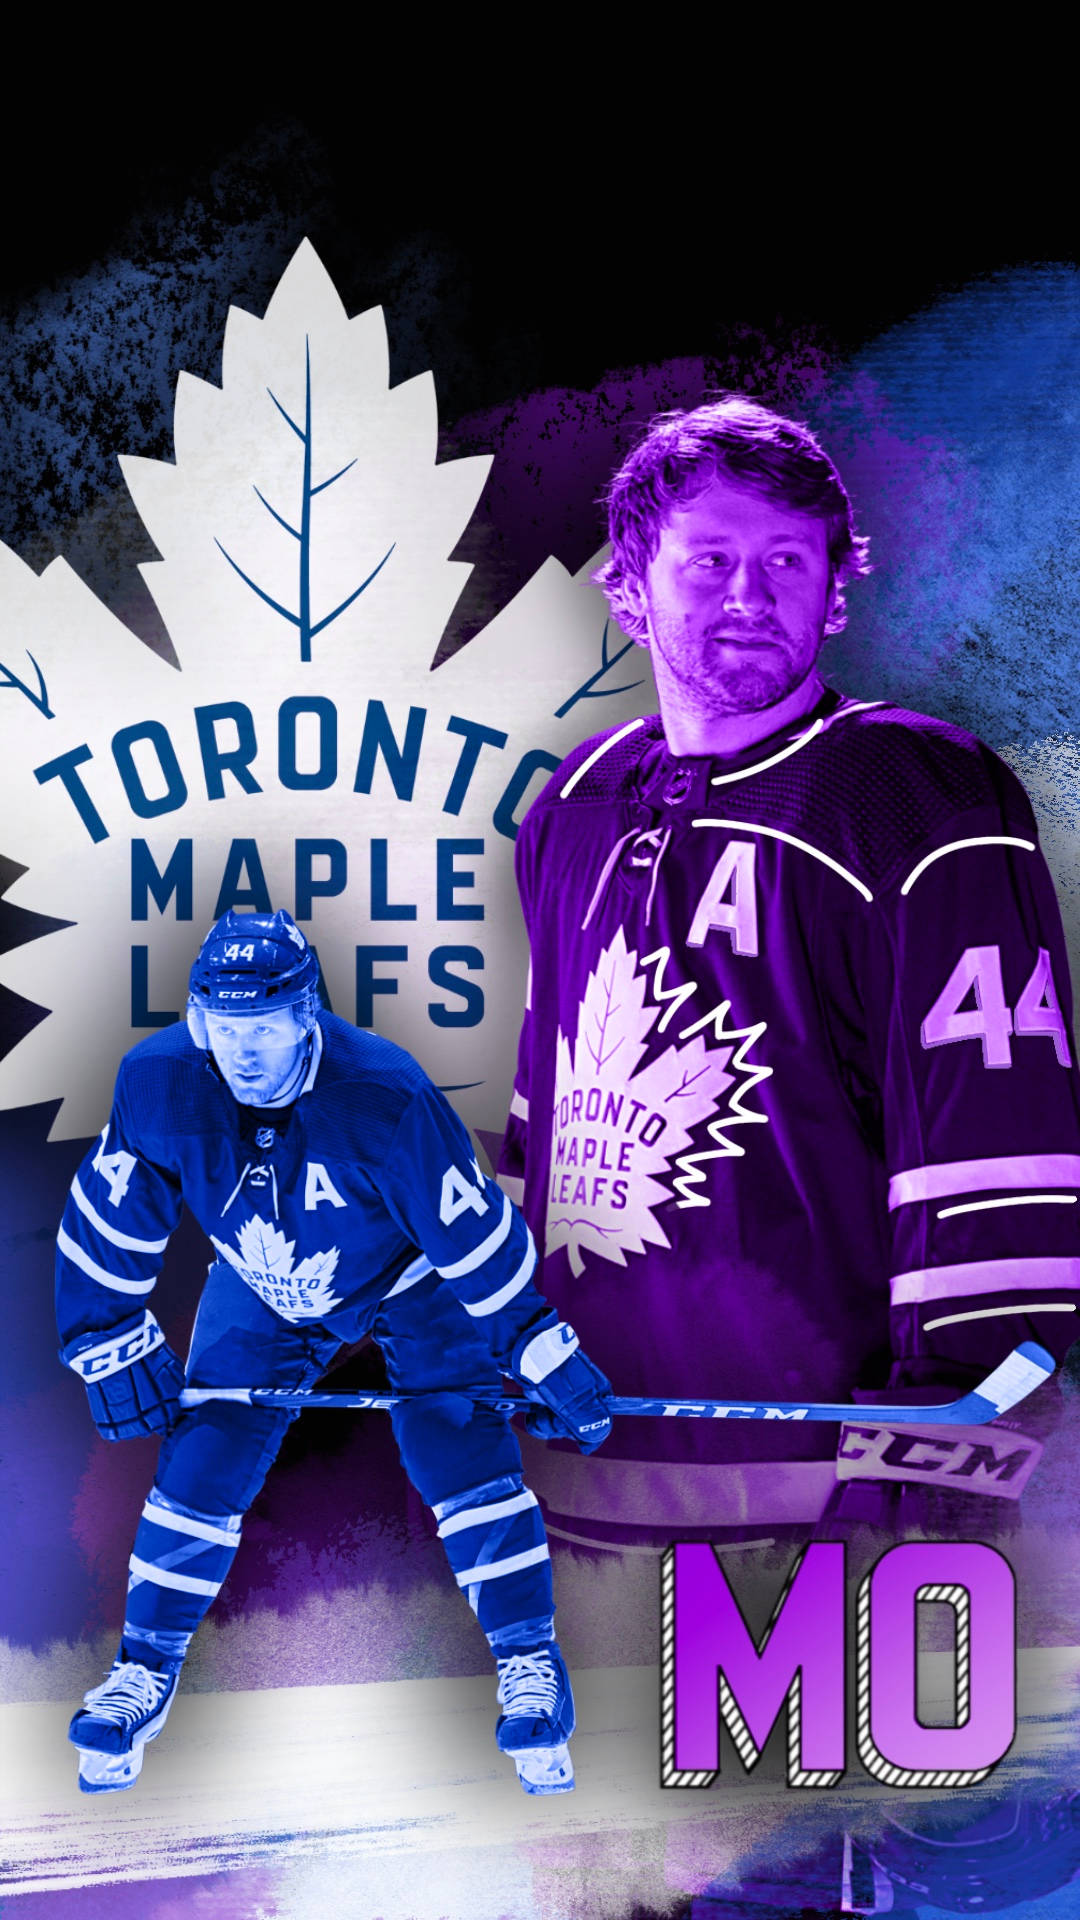 Toronto Maple Leafs wallpapers HD for desktop backgrounds